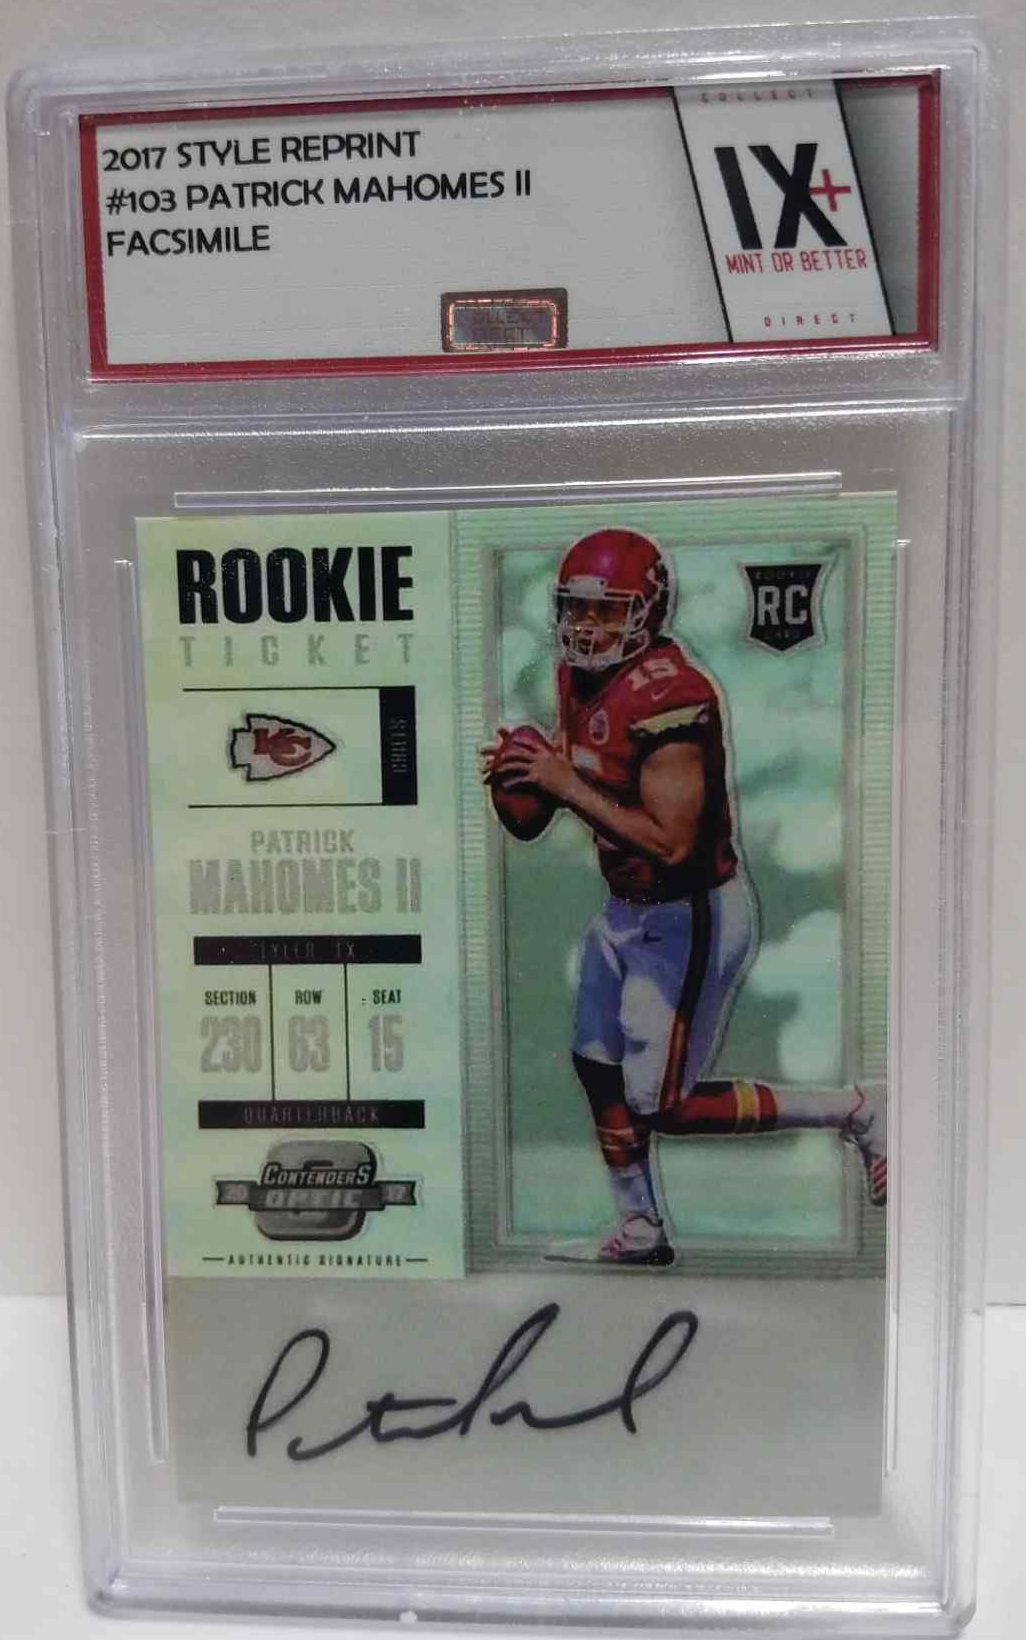 2017 Style REPRINT Patrick Mahomes Facsimile ROOKIE Card Graded By Collect Direct Mint Or Better In Case